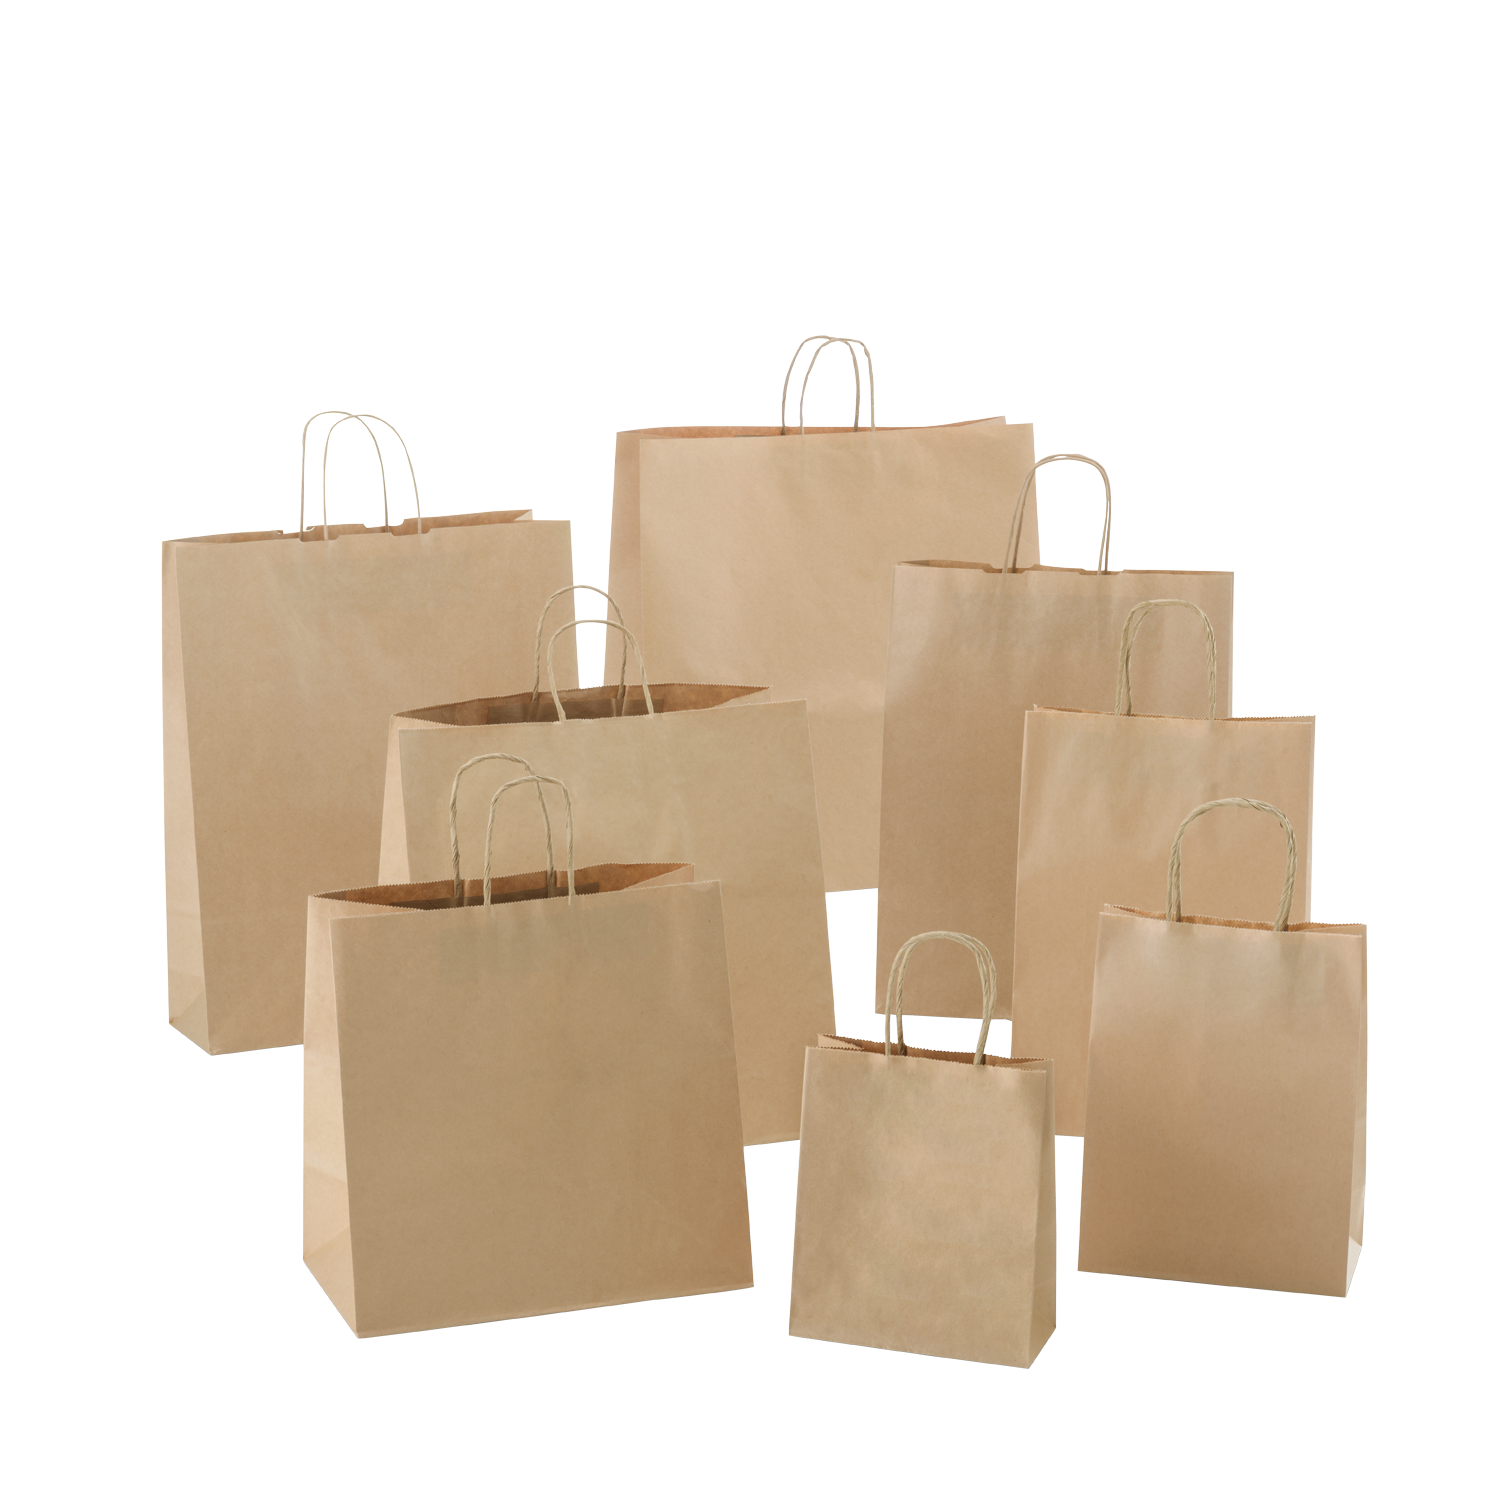 Group shot of paper carry bags available from Detpak